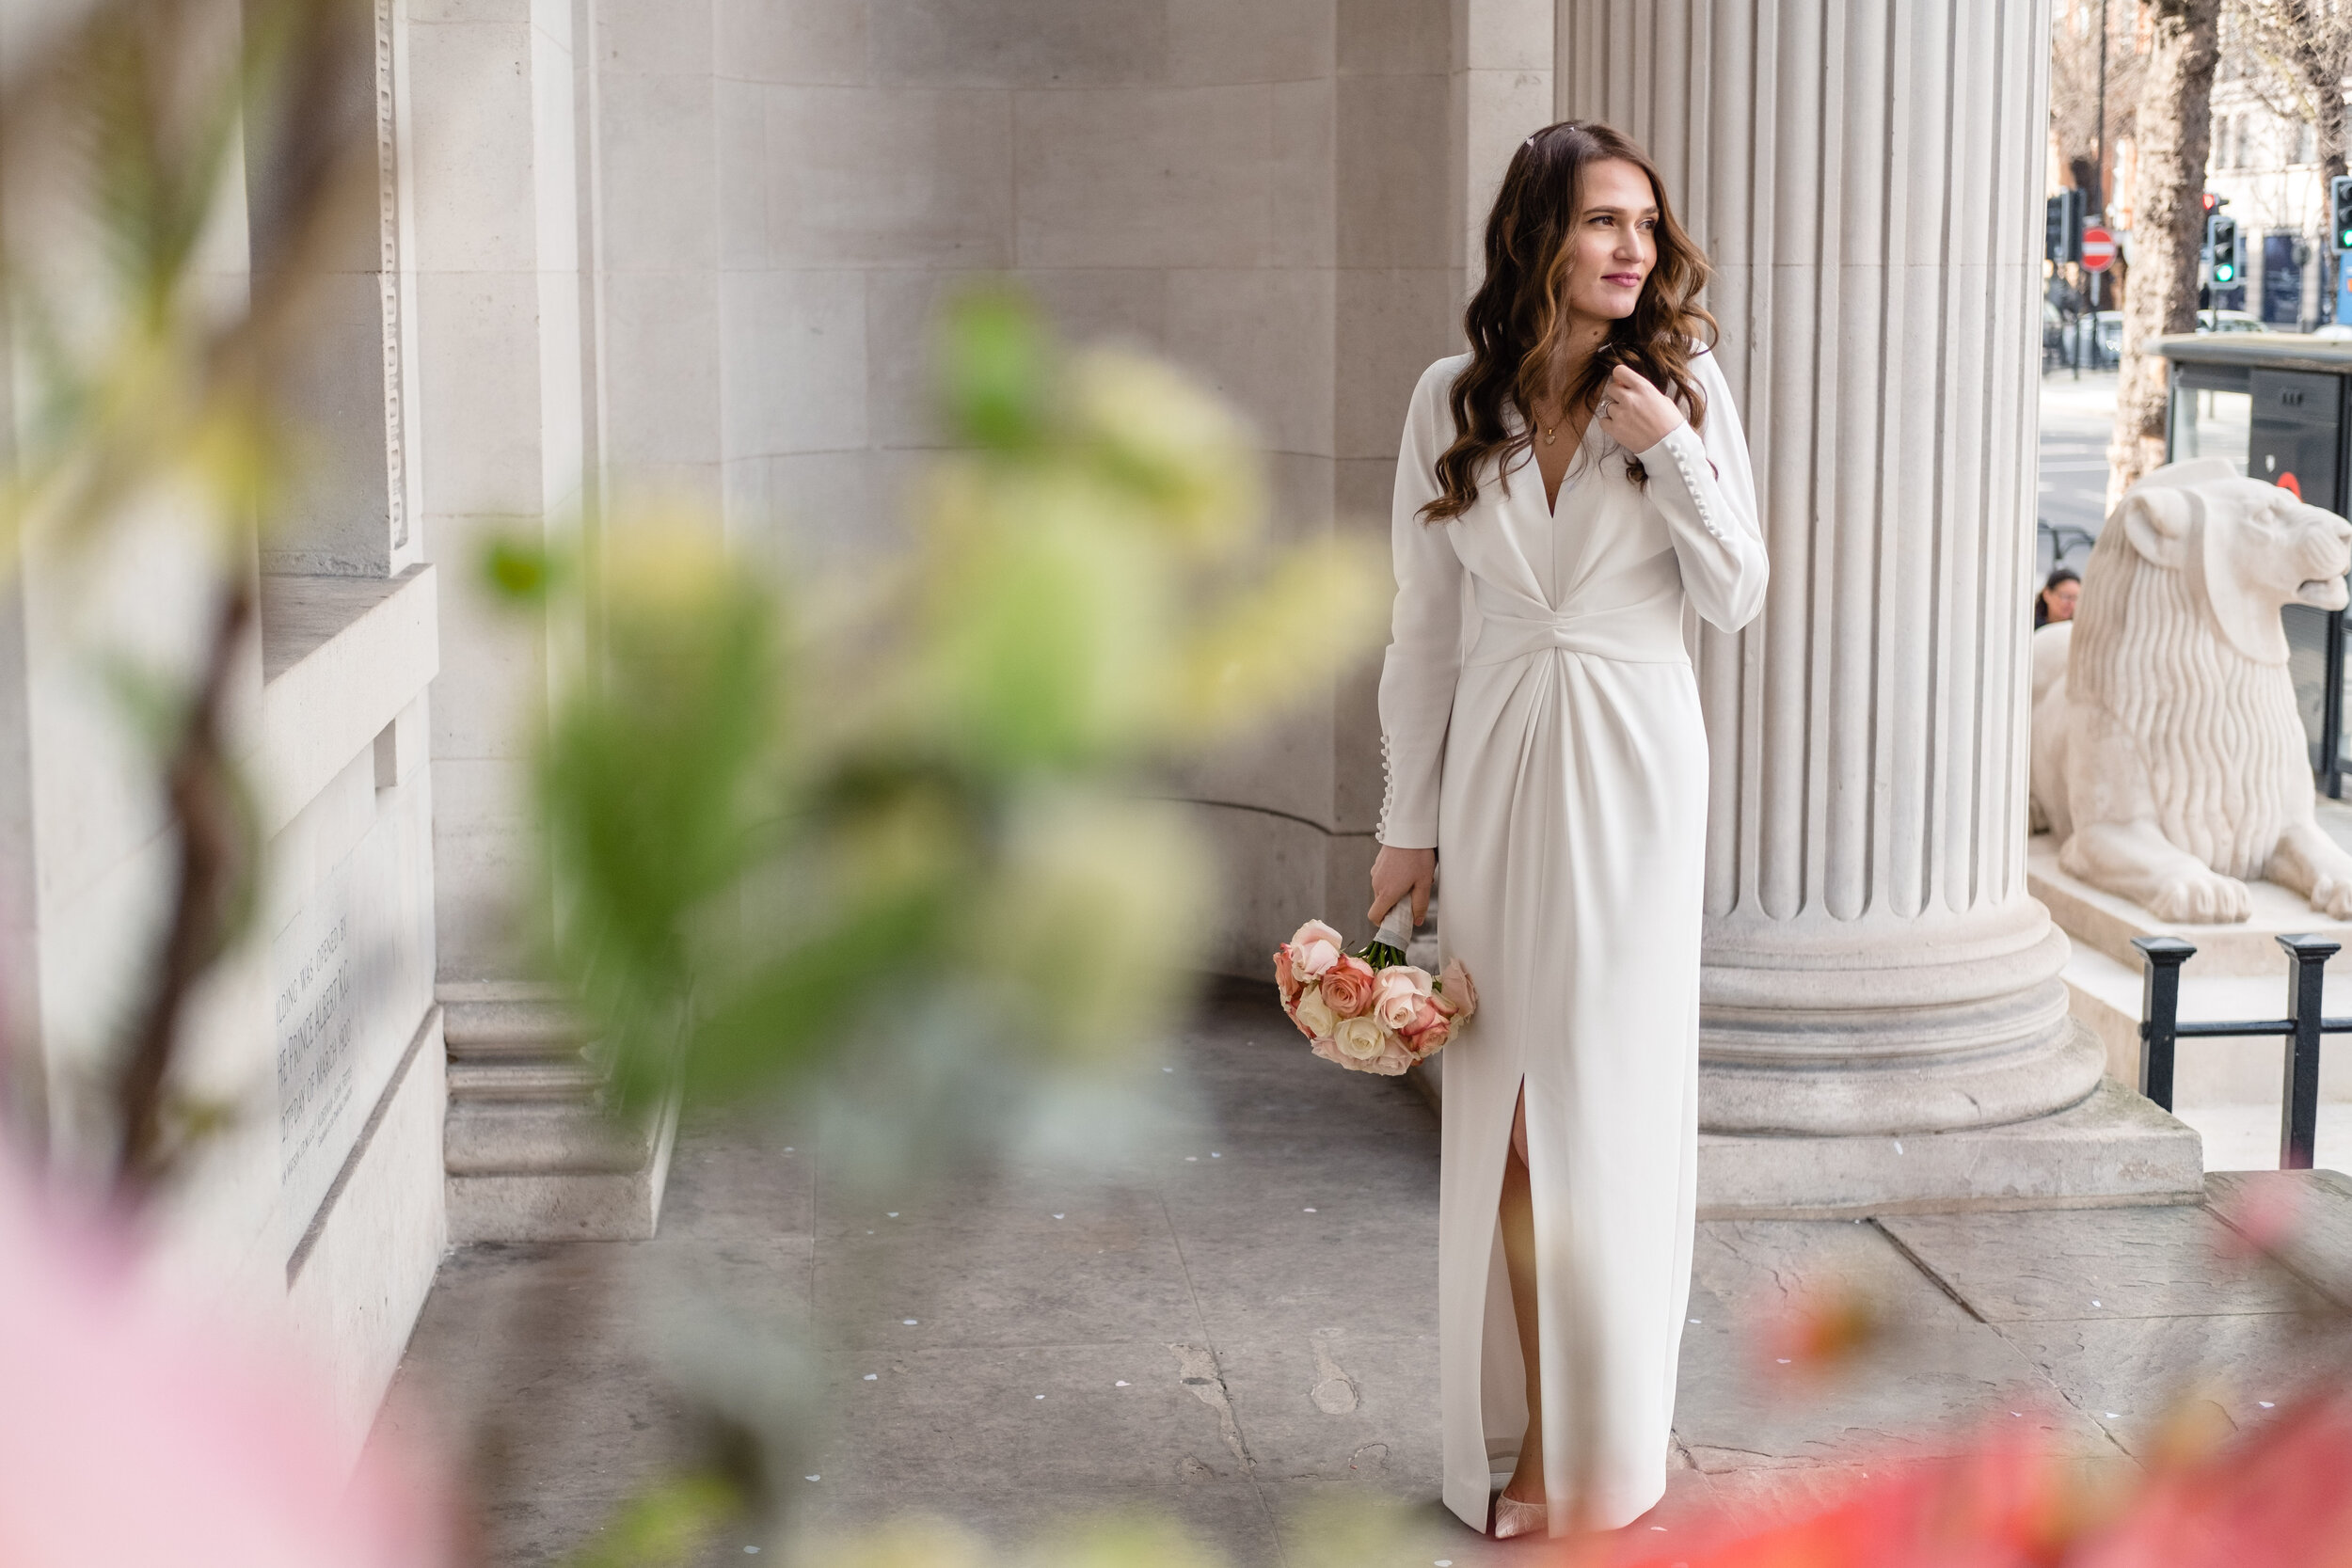 bride standing next to pillar with foliage in foreground